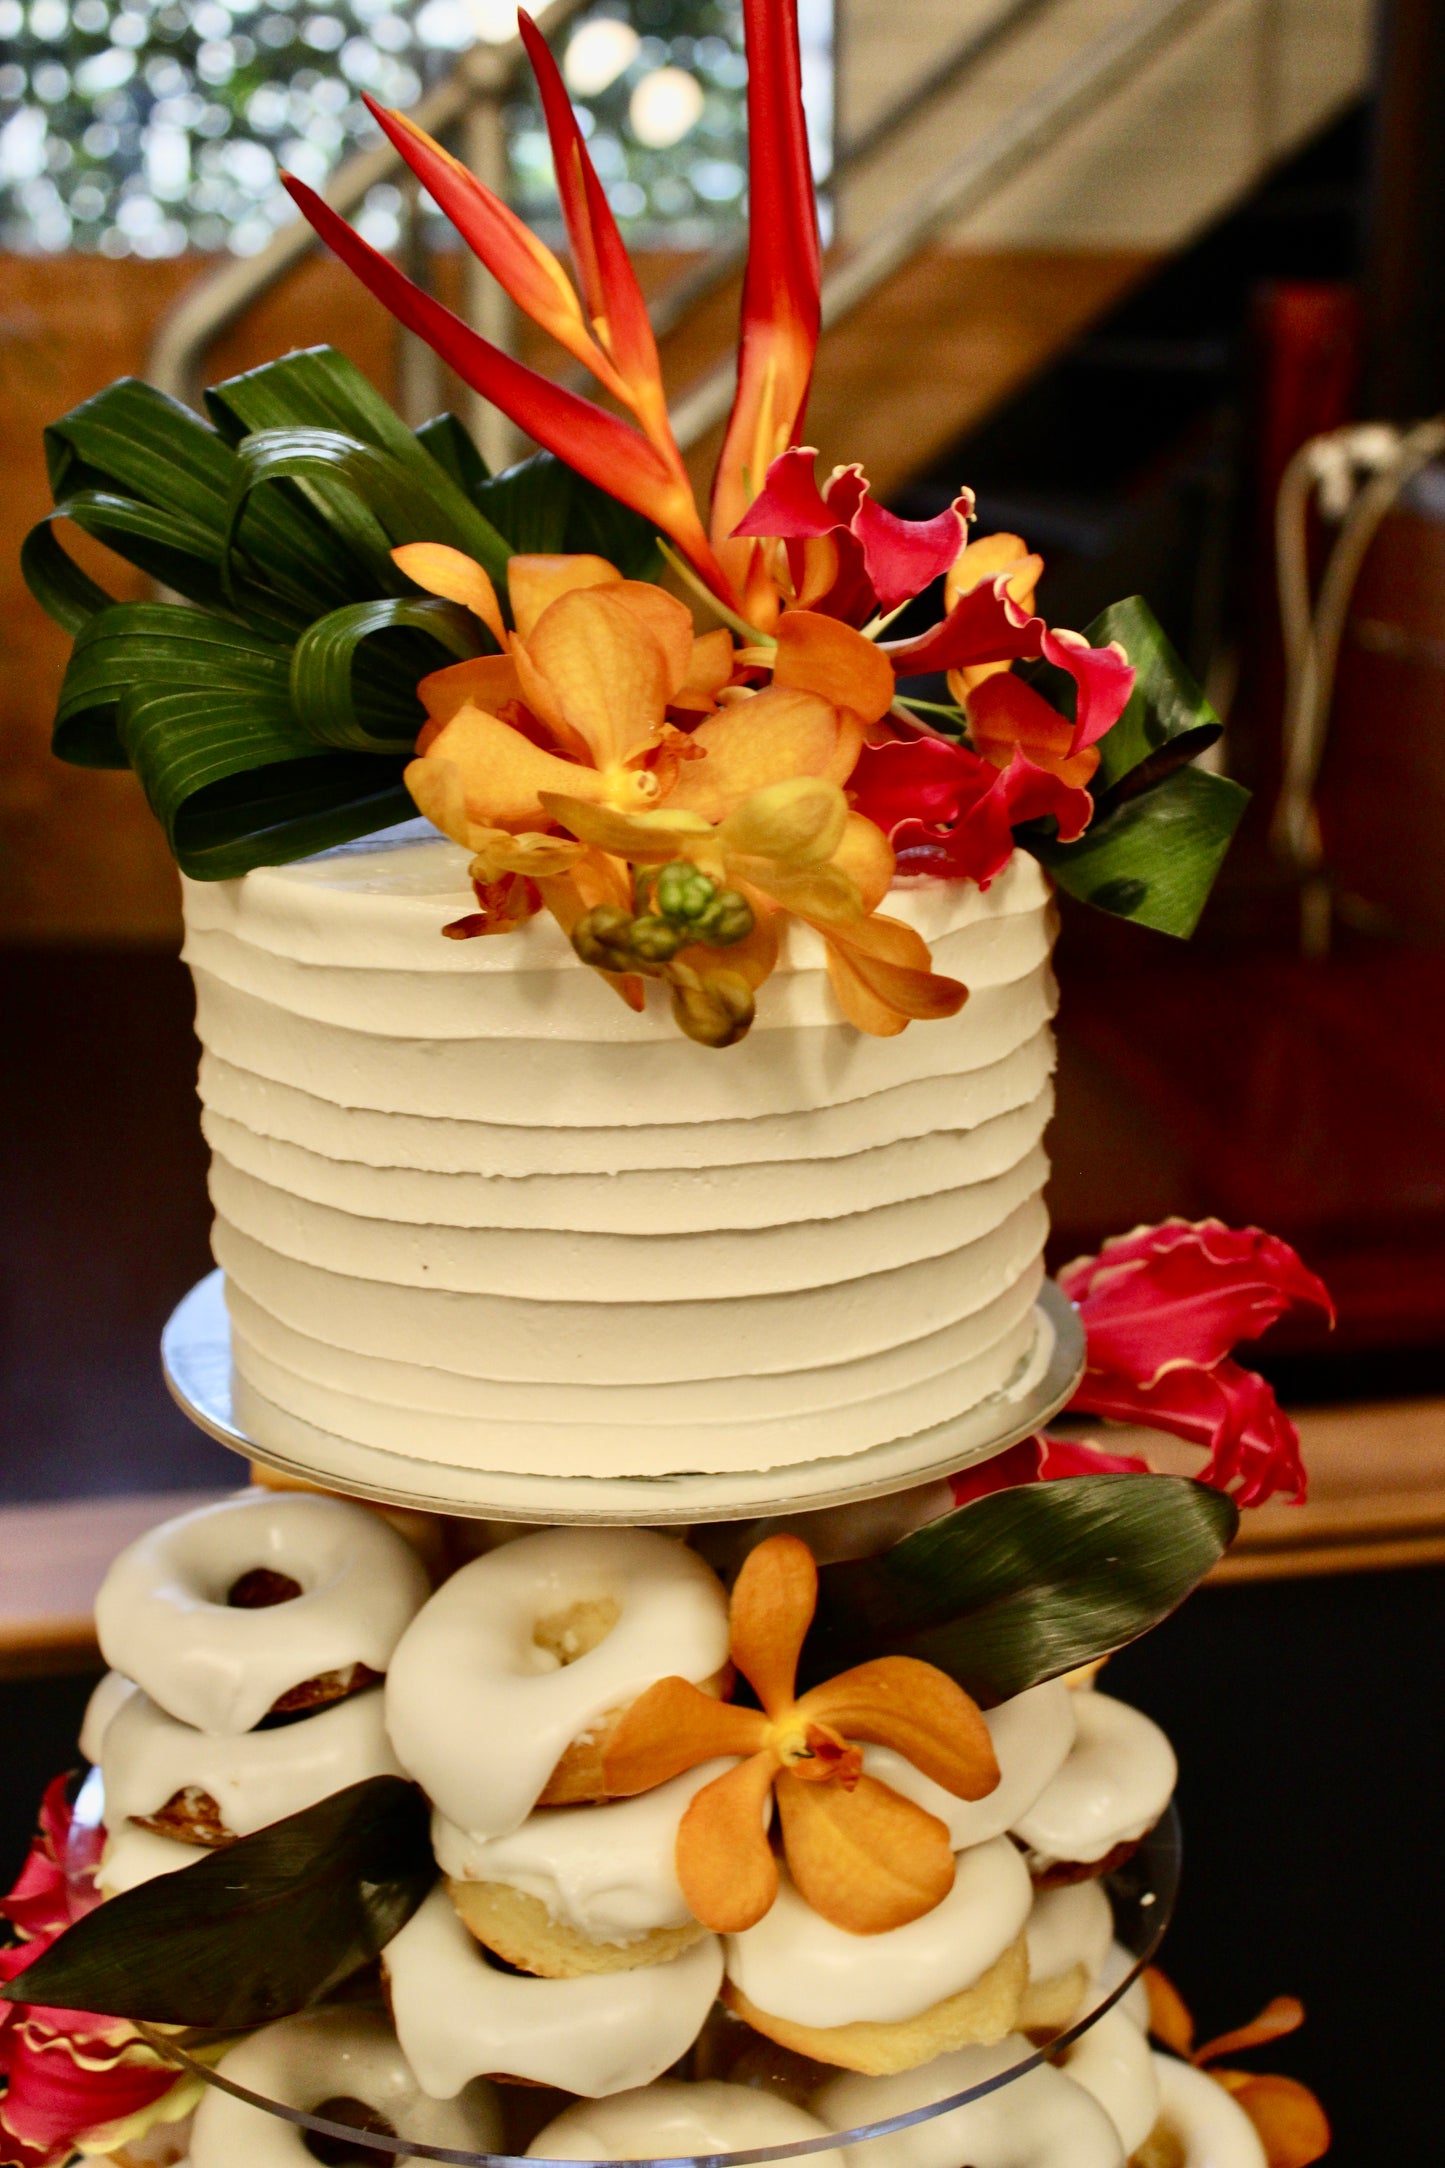 Donut Tower Cake in Bright Tropical Flowers